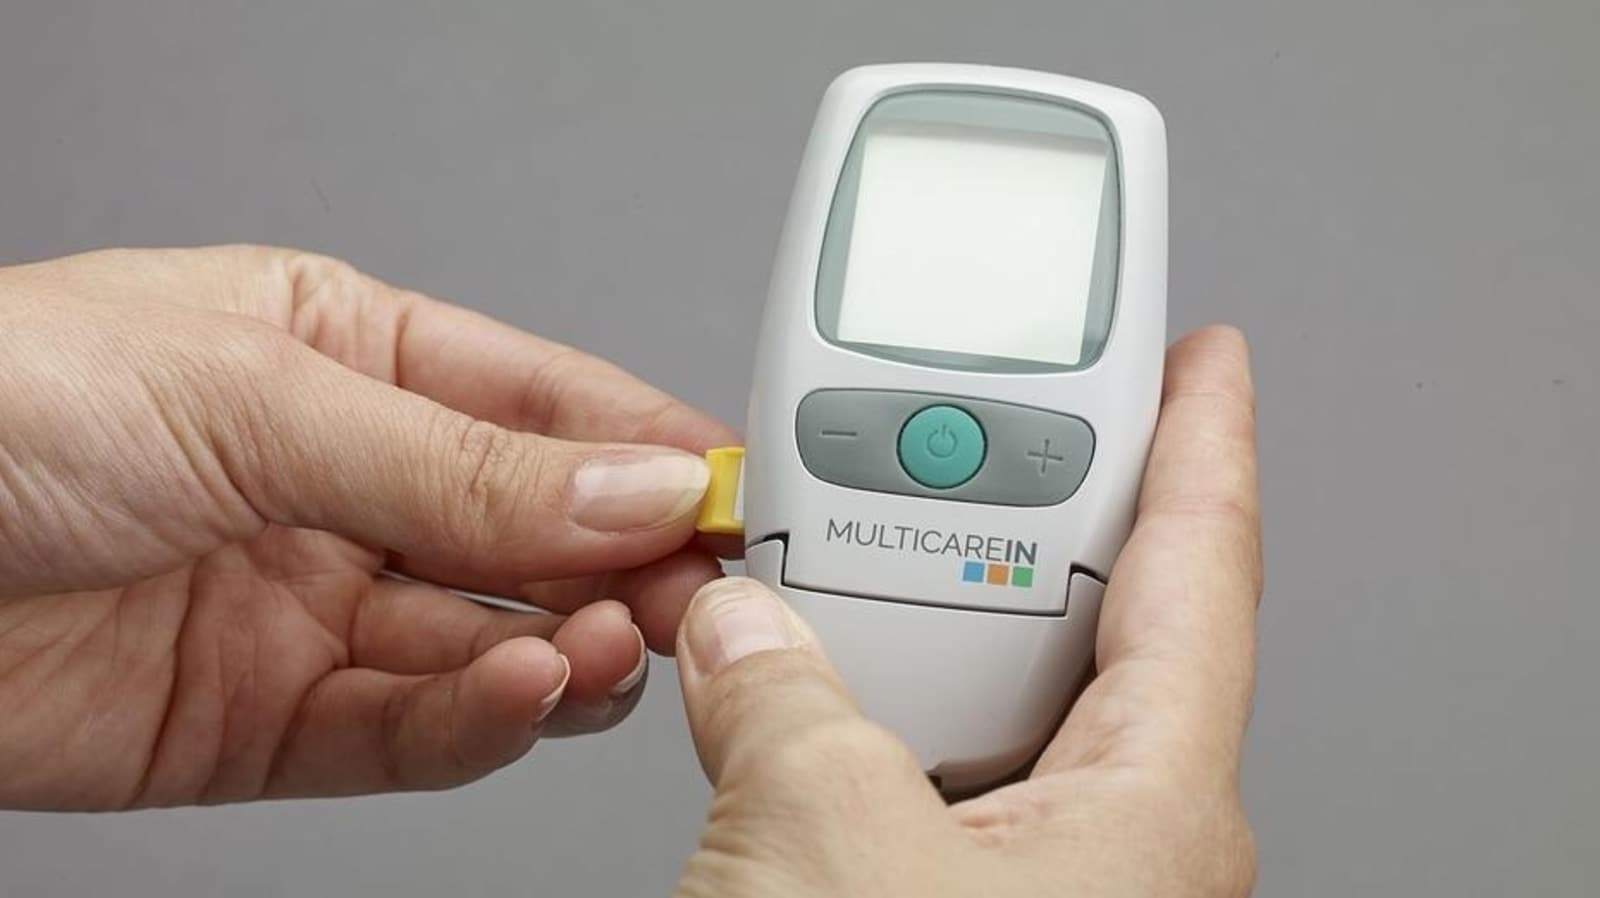 How to check blood sugar levels at home; step-by-step guide | Health